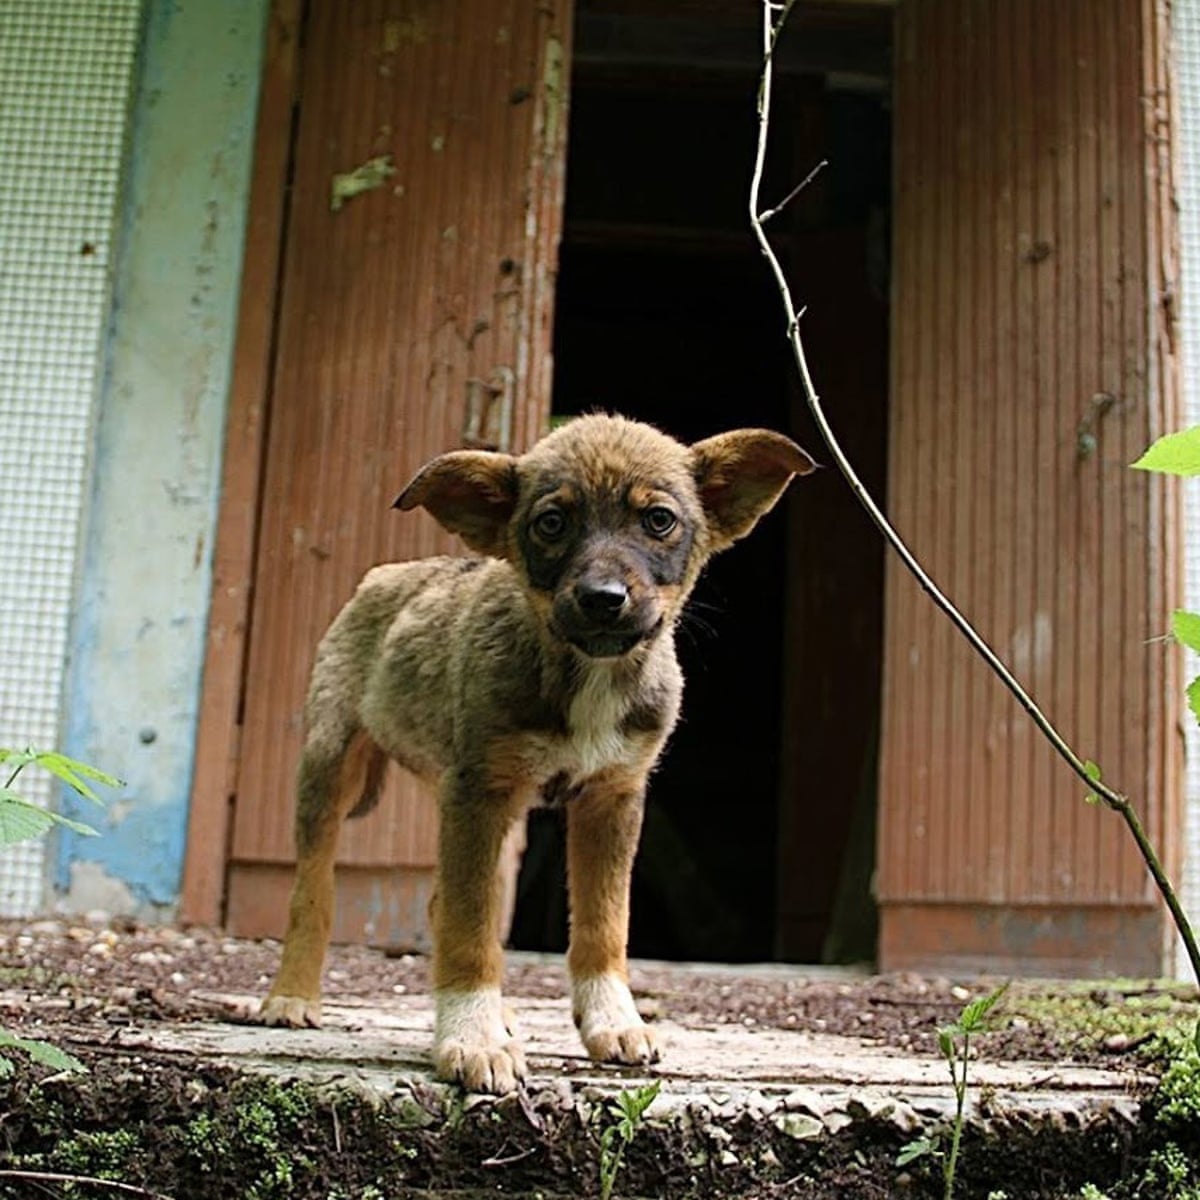 Meet the dogs of Chernobyl – the abandoned pets that formed their own  canine community | Dogs | The Guardian